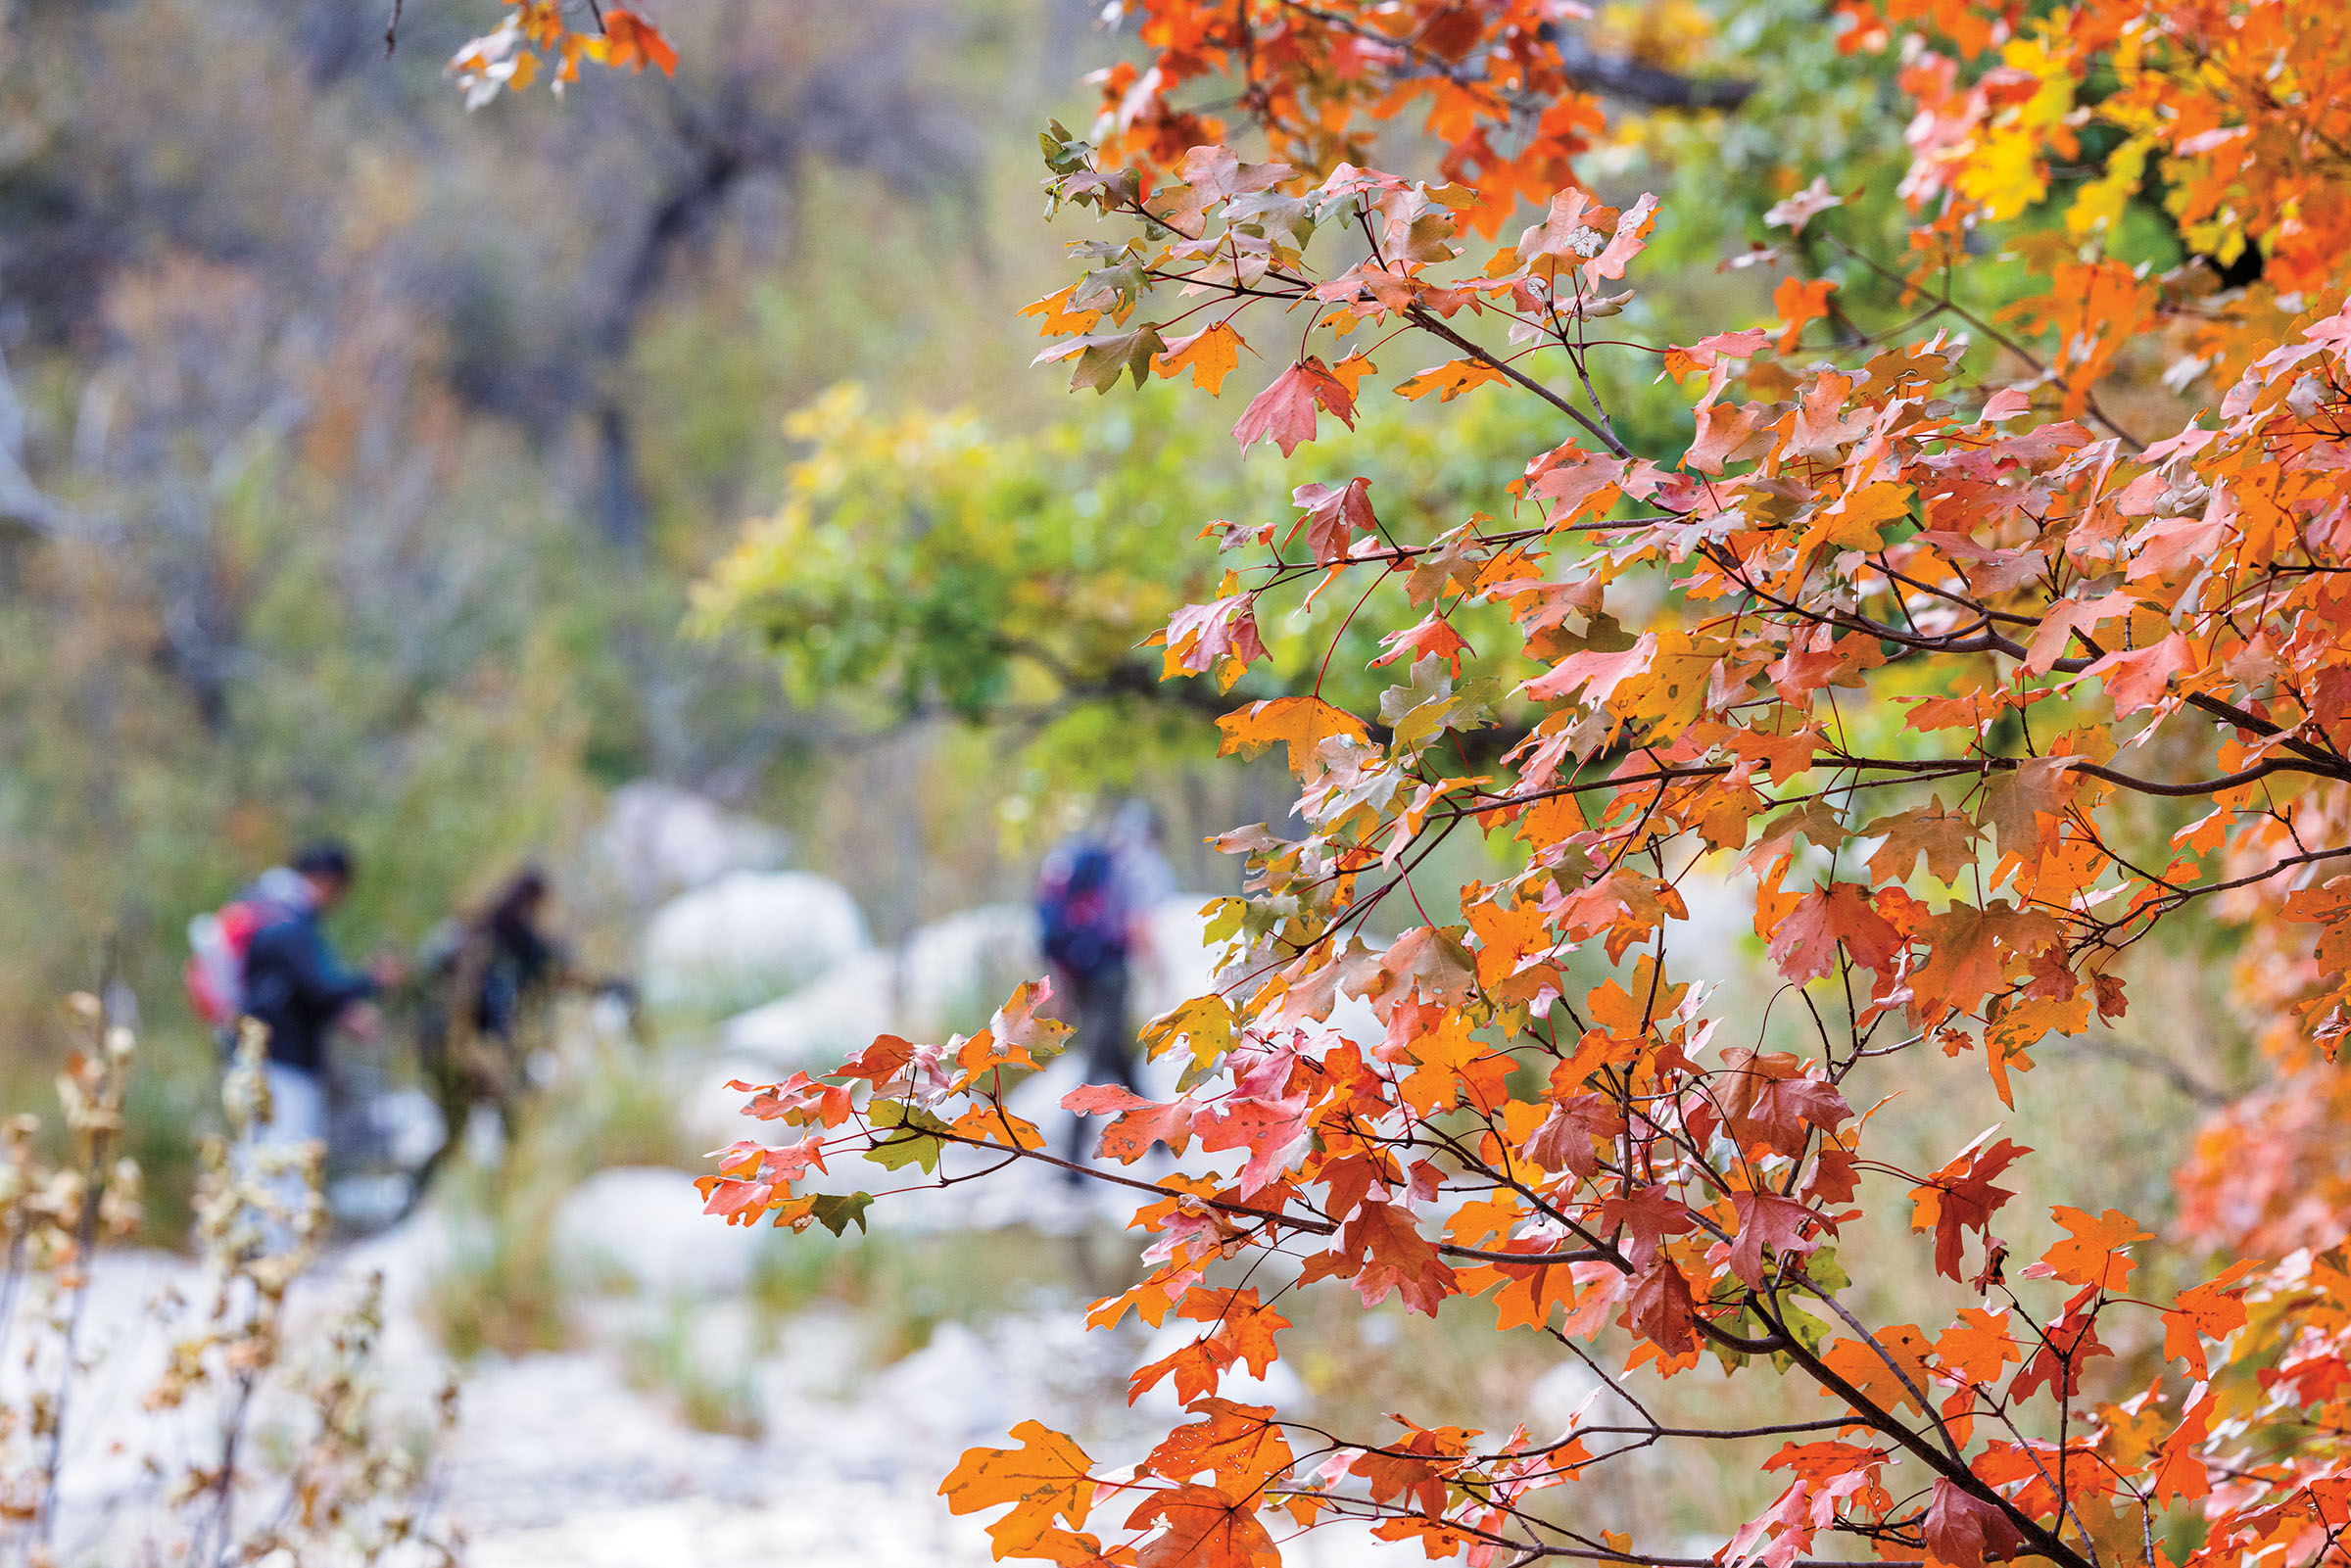 In the foreground, bright orange leaves on a tree with hikers on rocky stones in the background